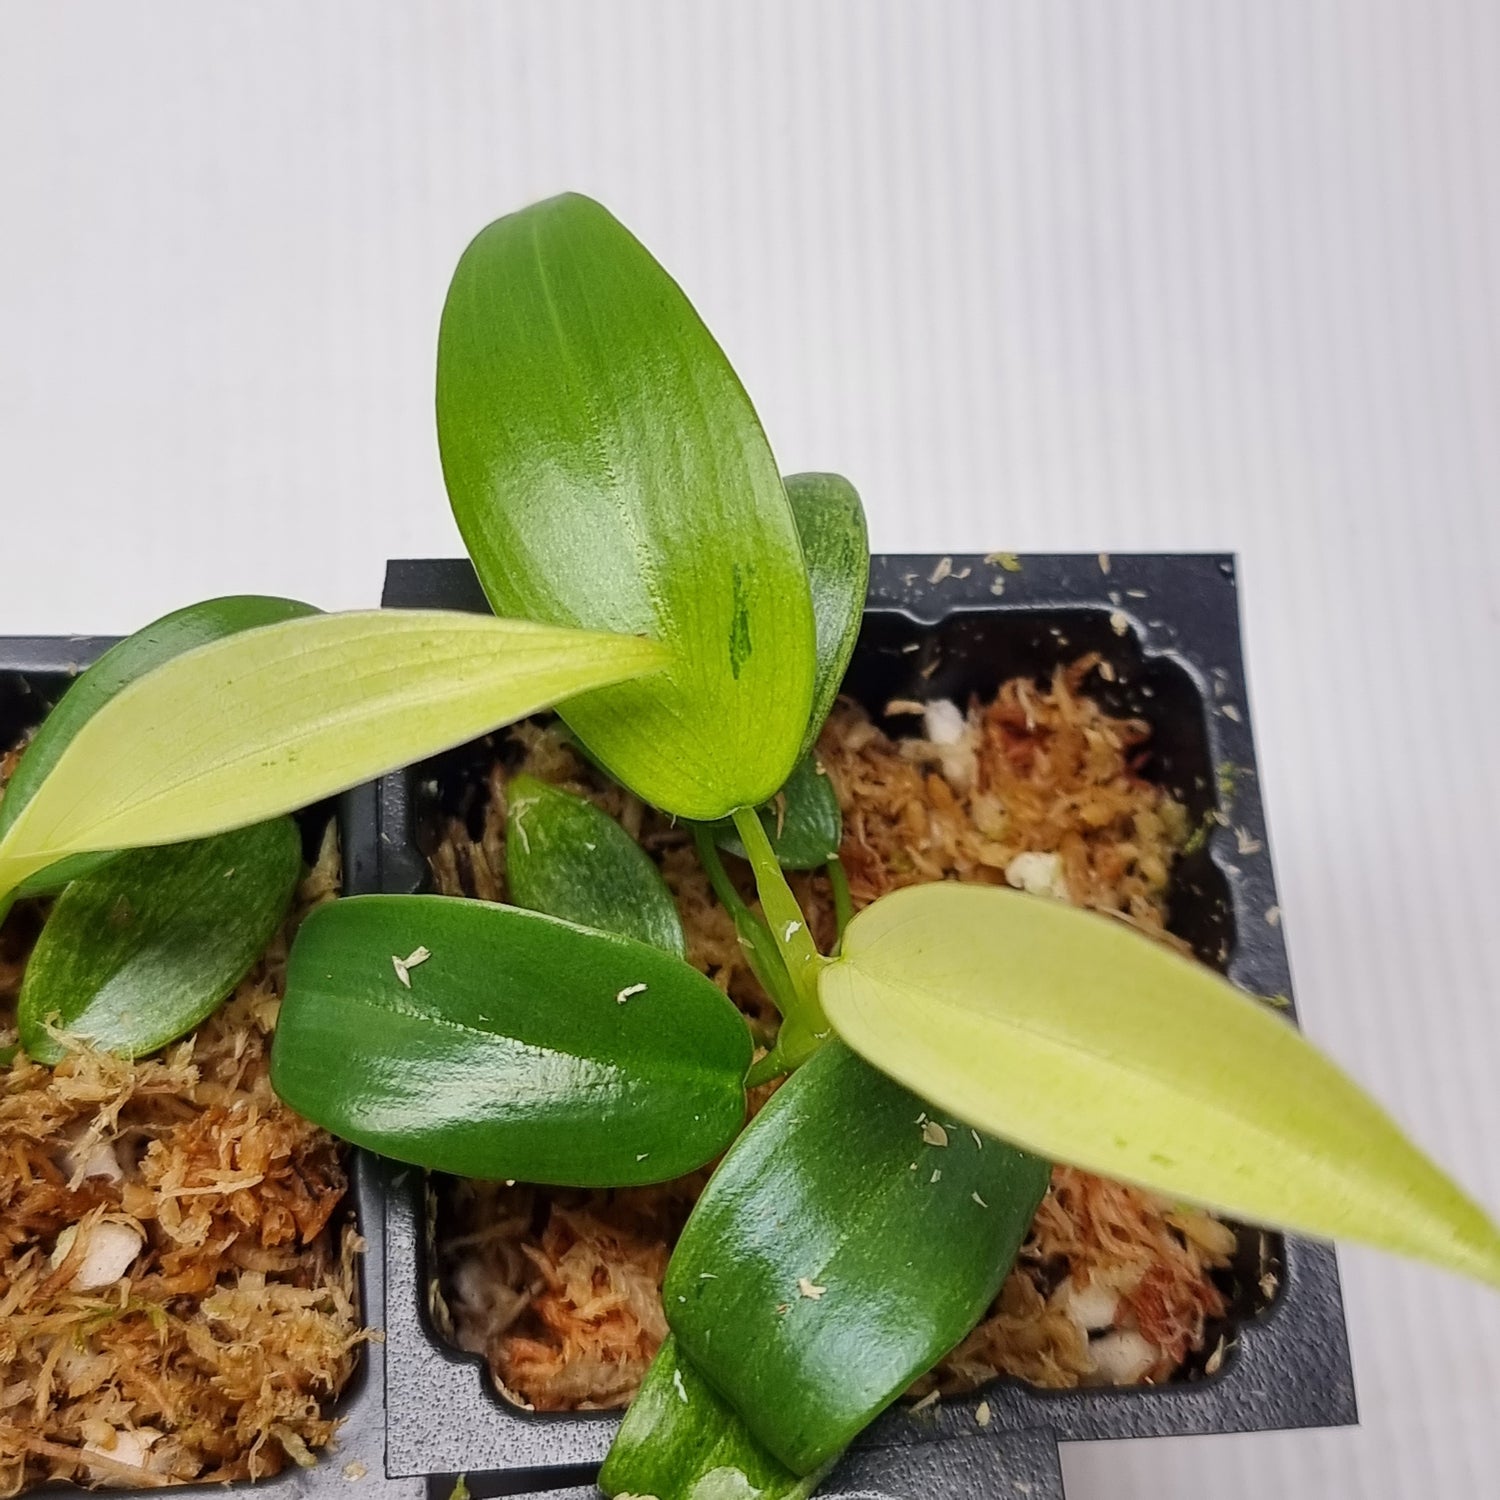 rare Philodendron Whipple Way for sale in Perth Australia